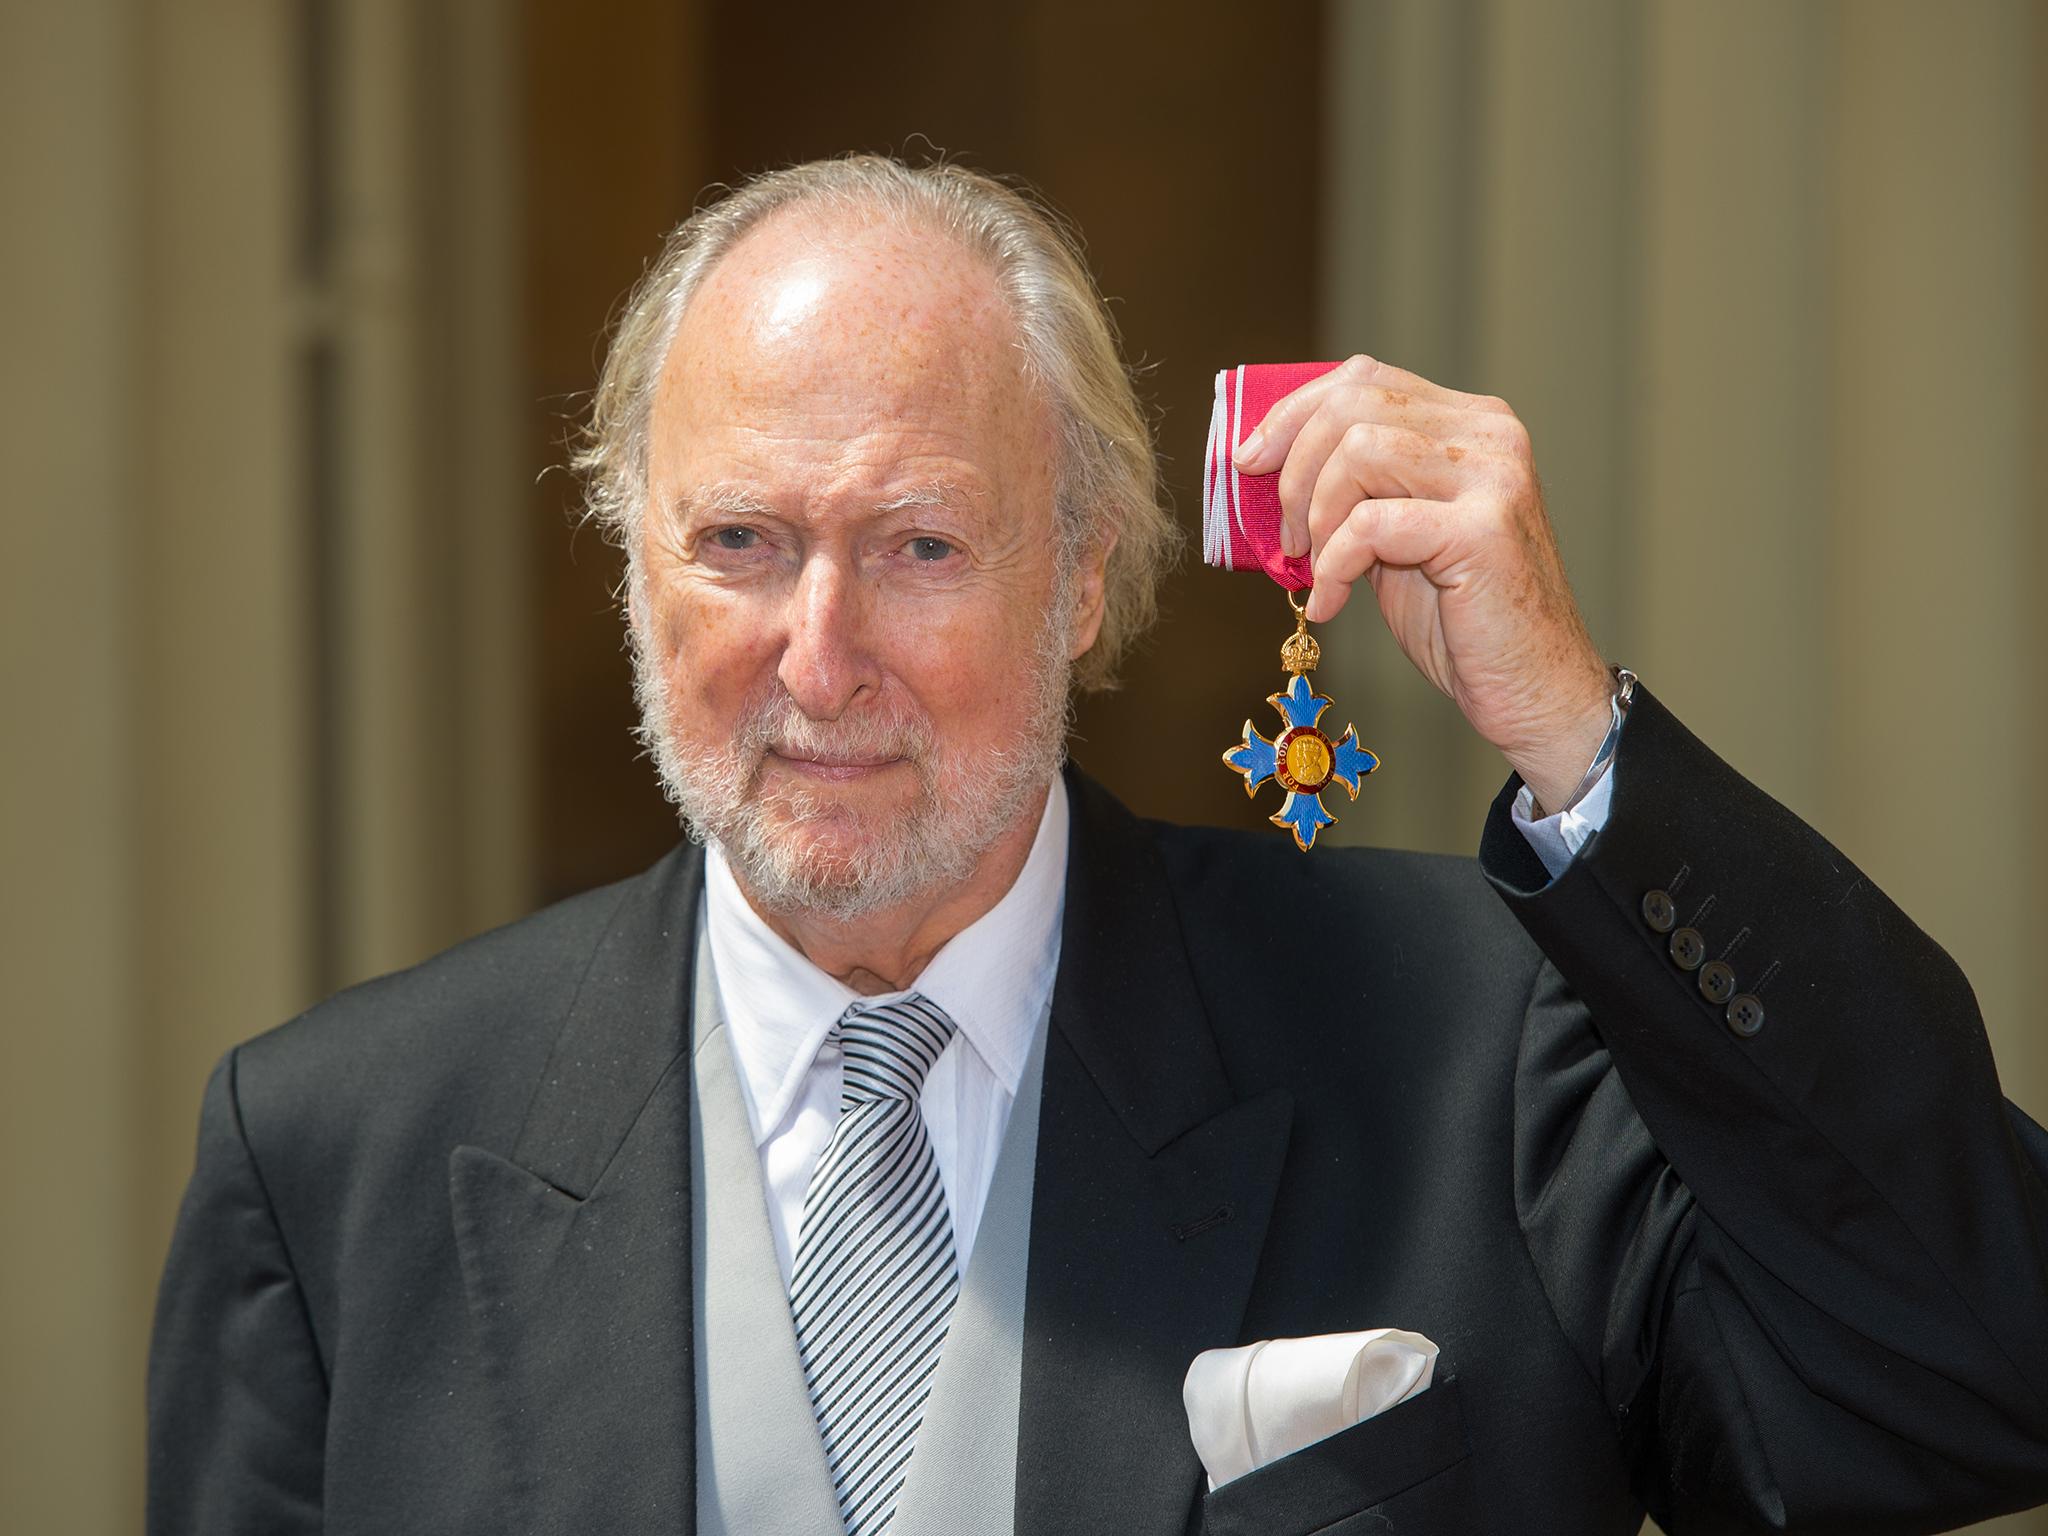 Victor was awarded a CBE for services to literature